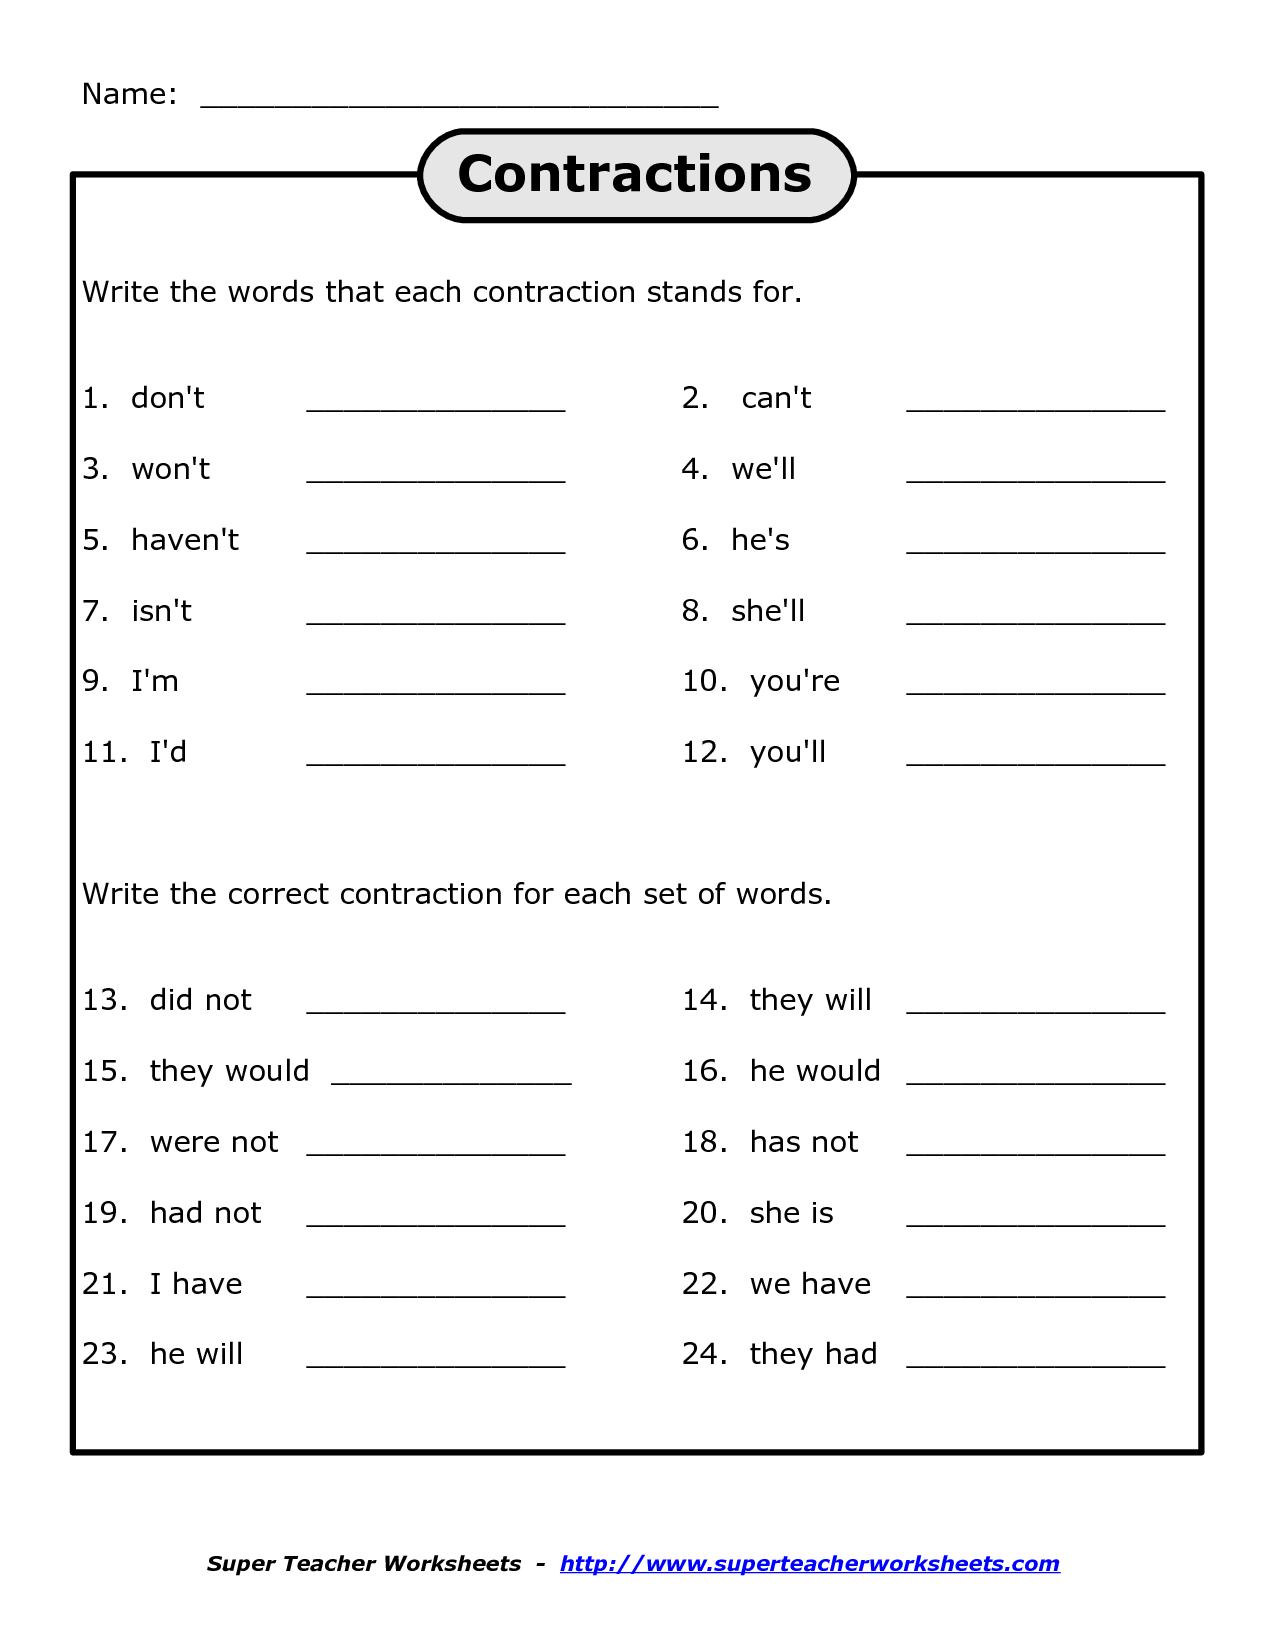 12-best-images-of-contractions-using-not-worksheets-contractions